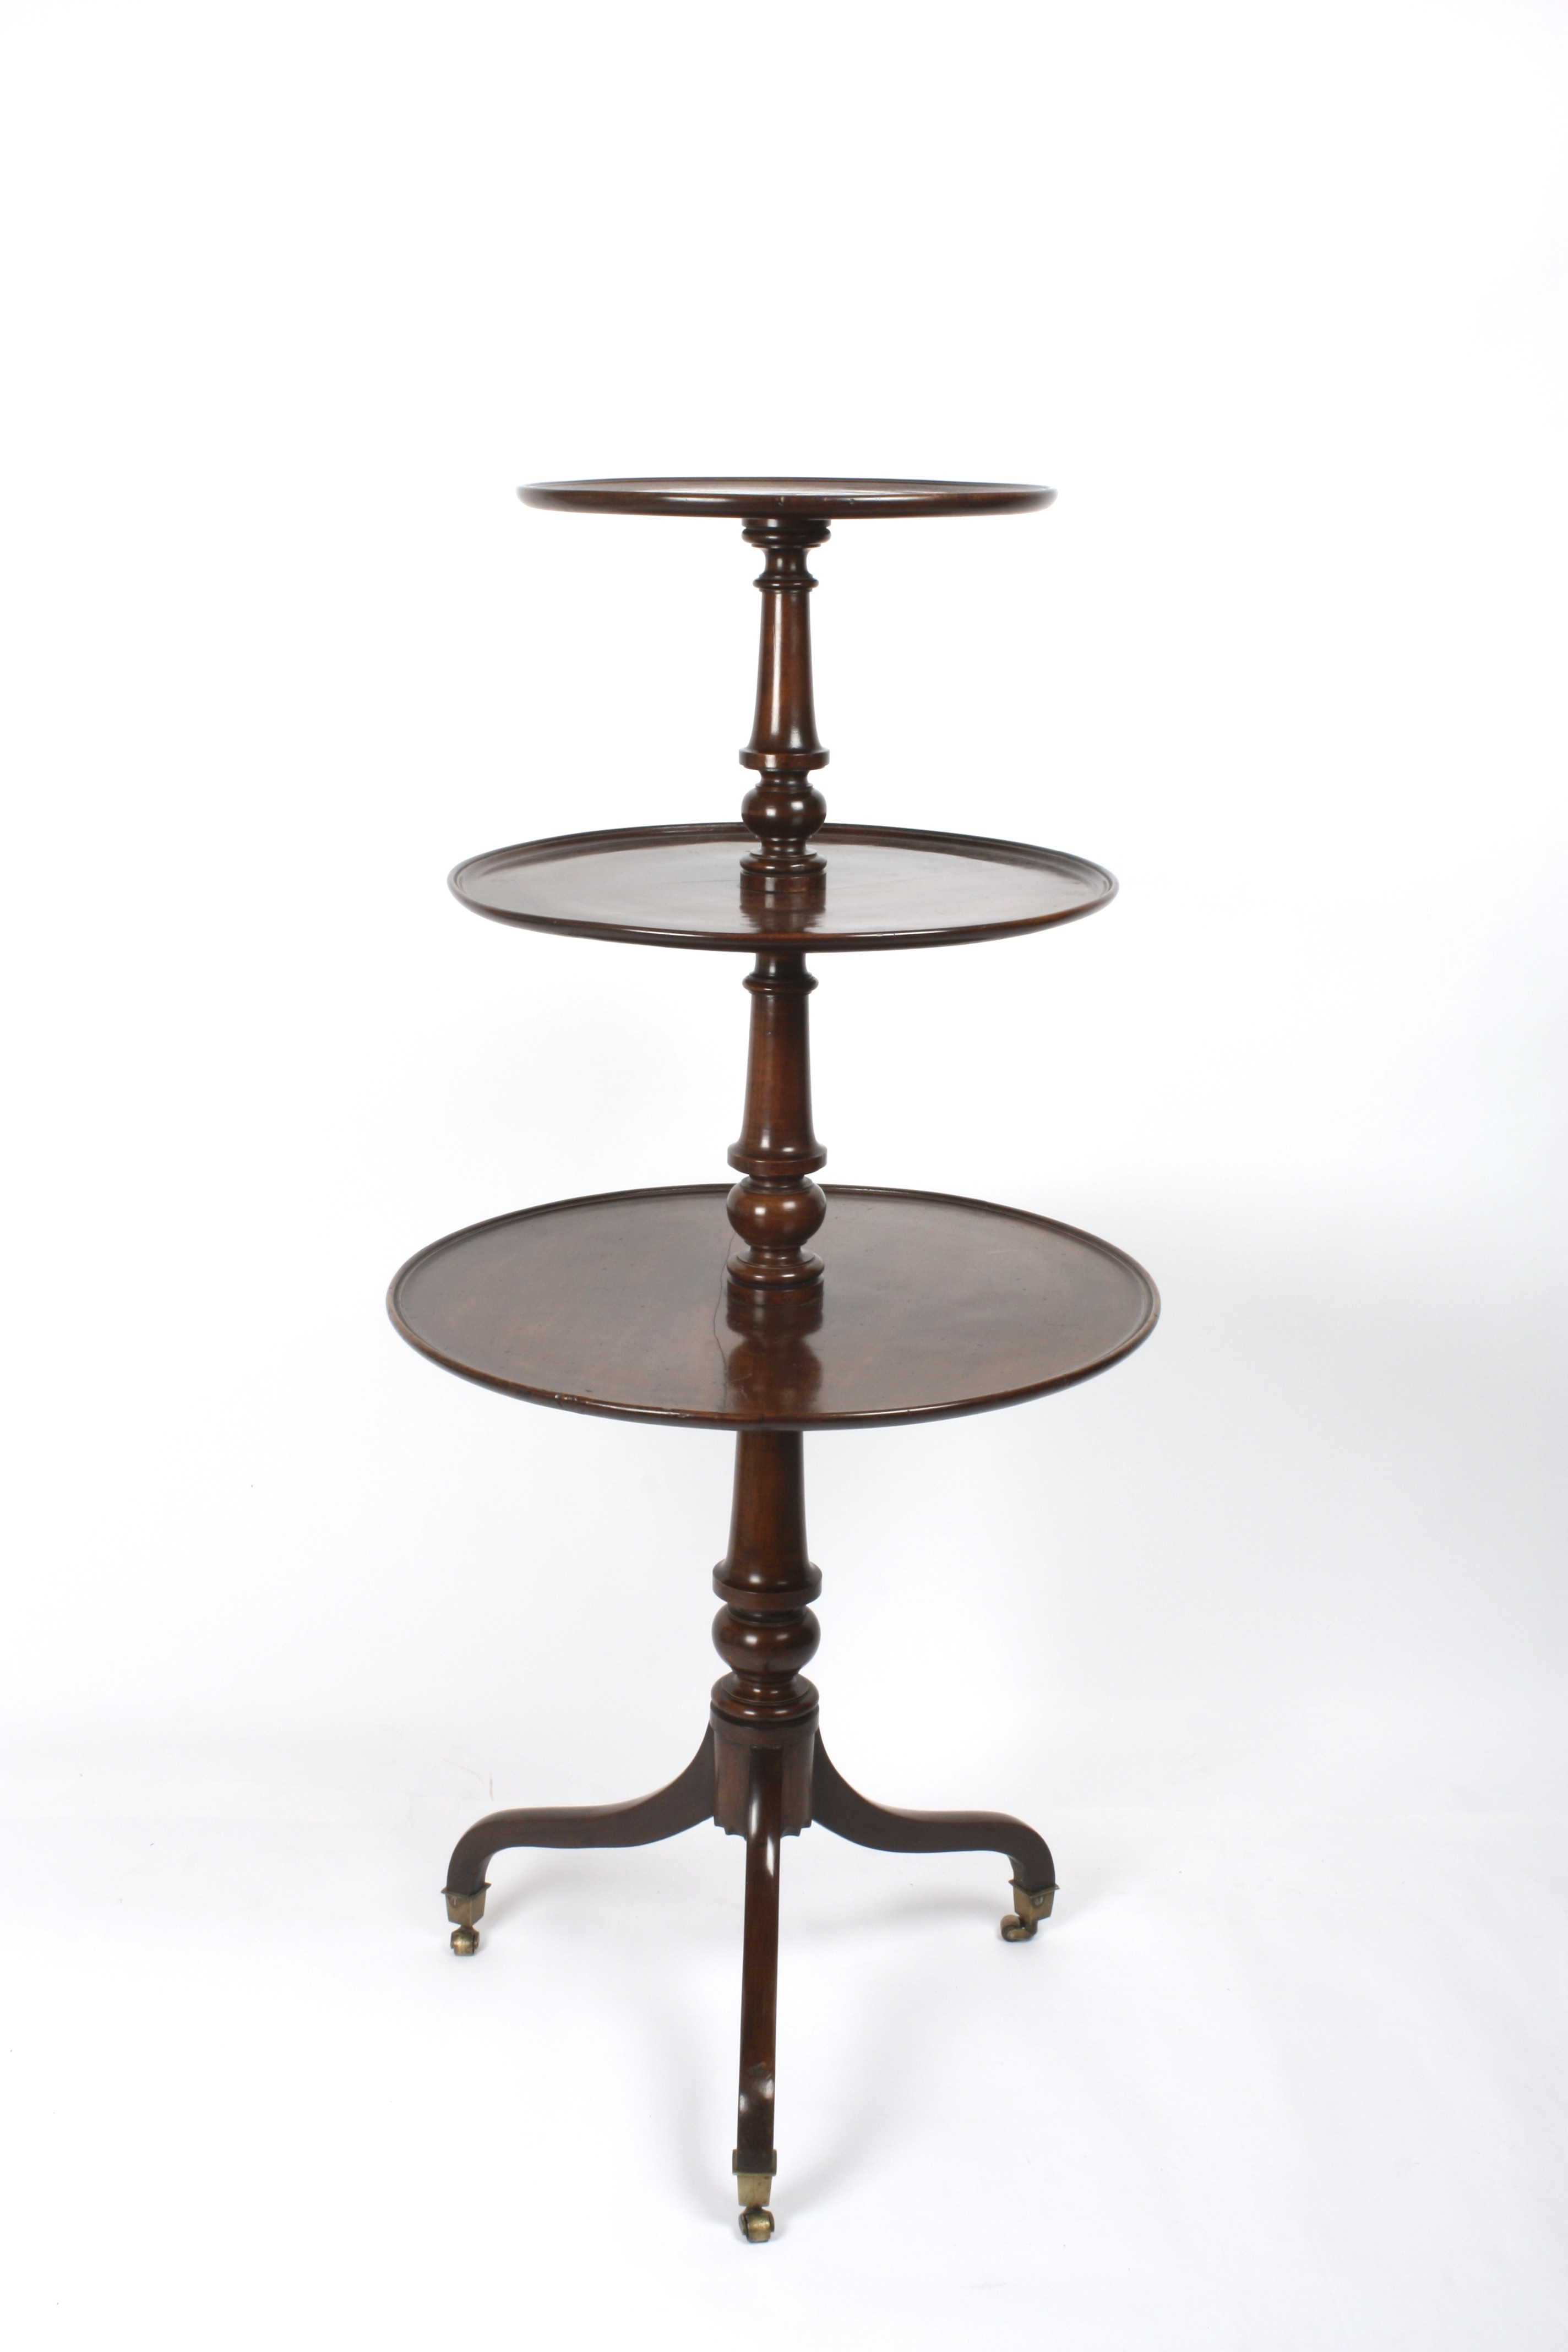 A George III mahogany three tier dumb waiter
with circular graduated tiers and turned columns,